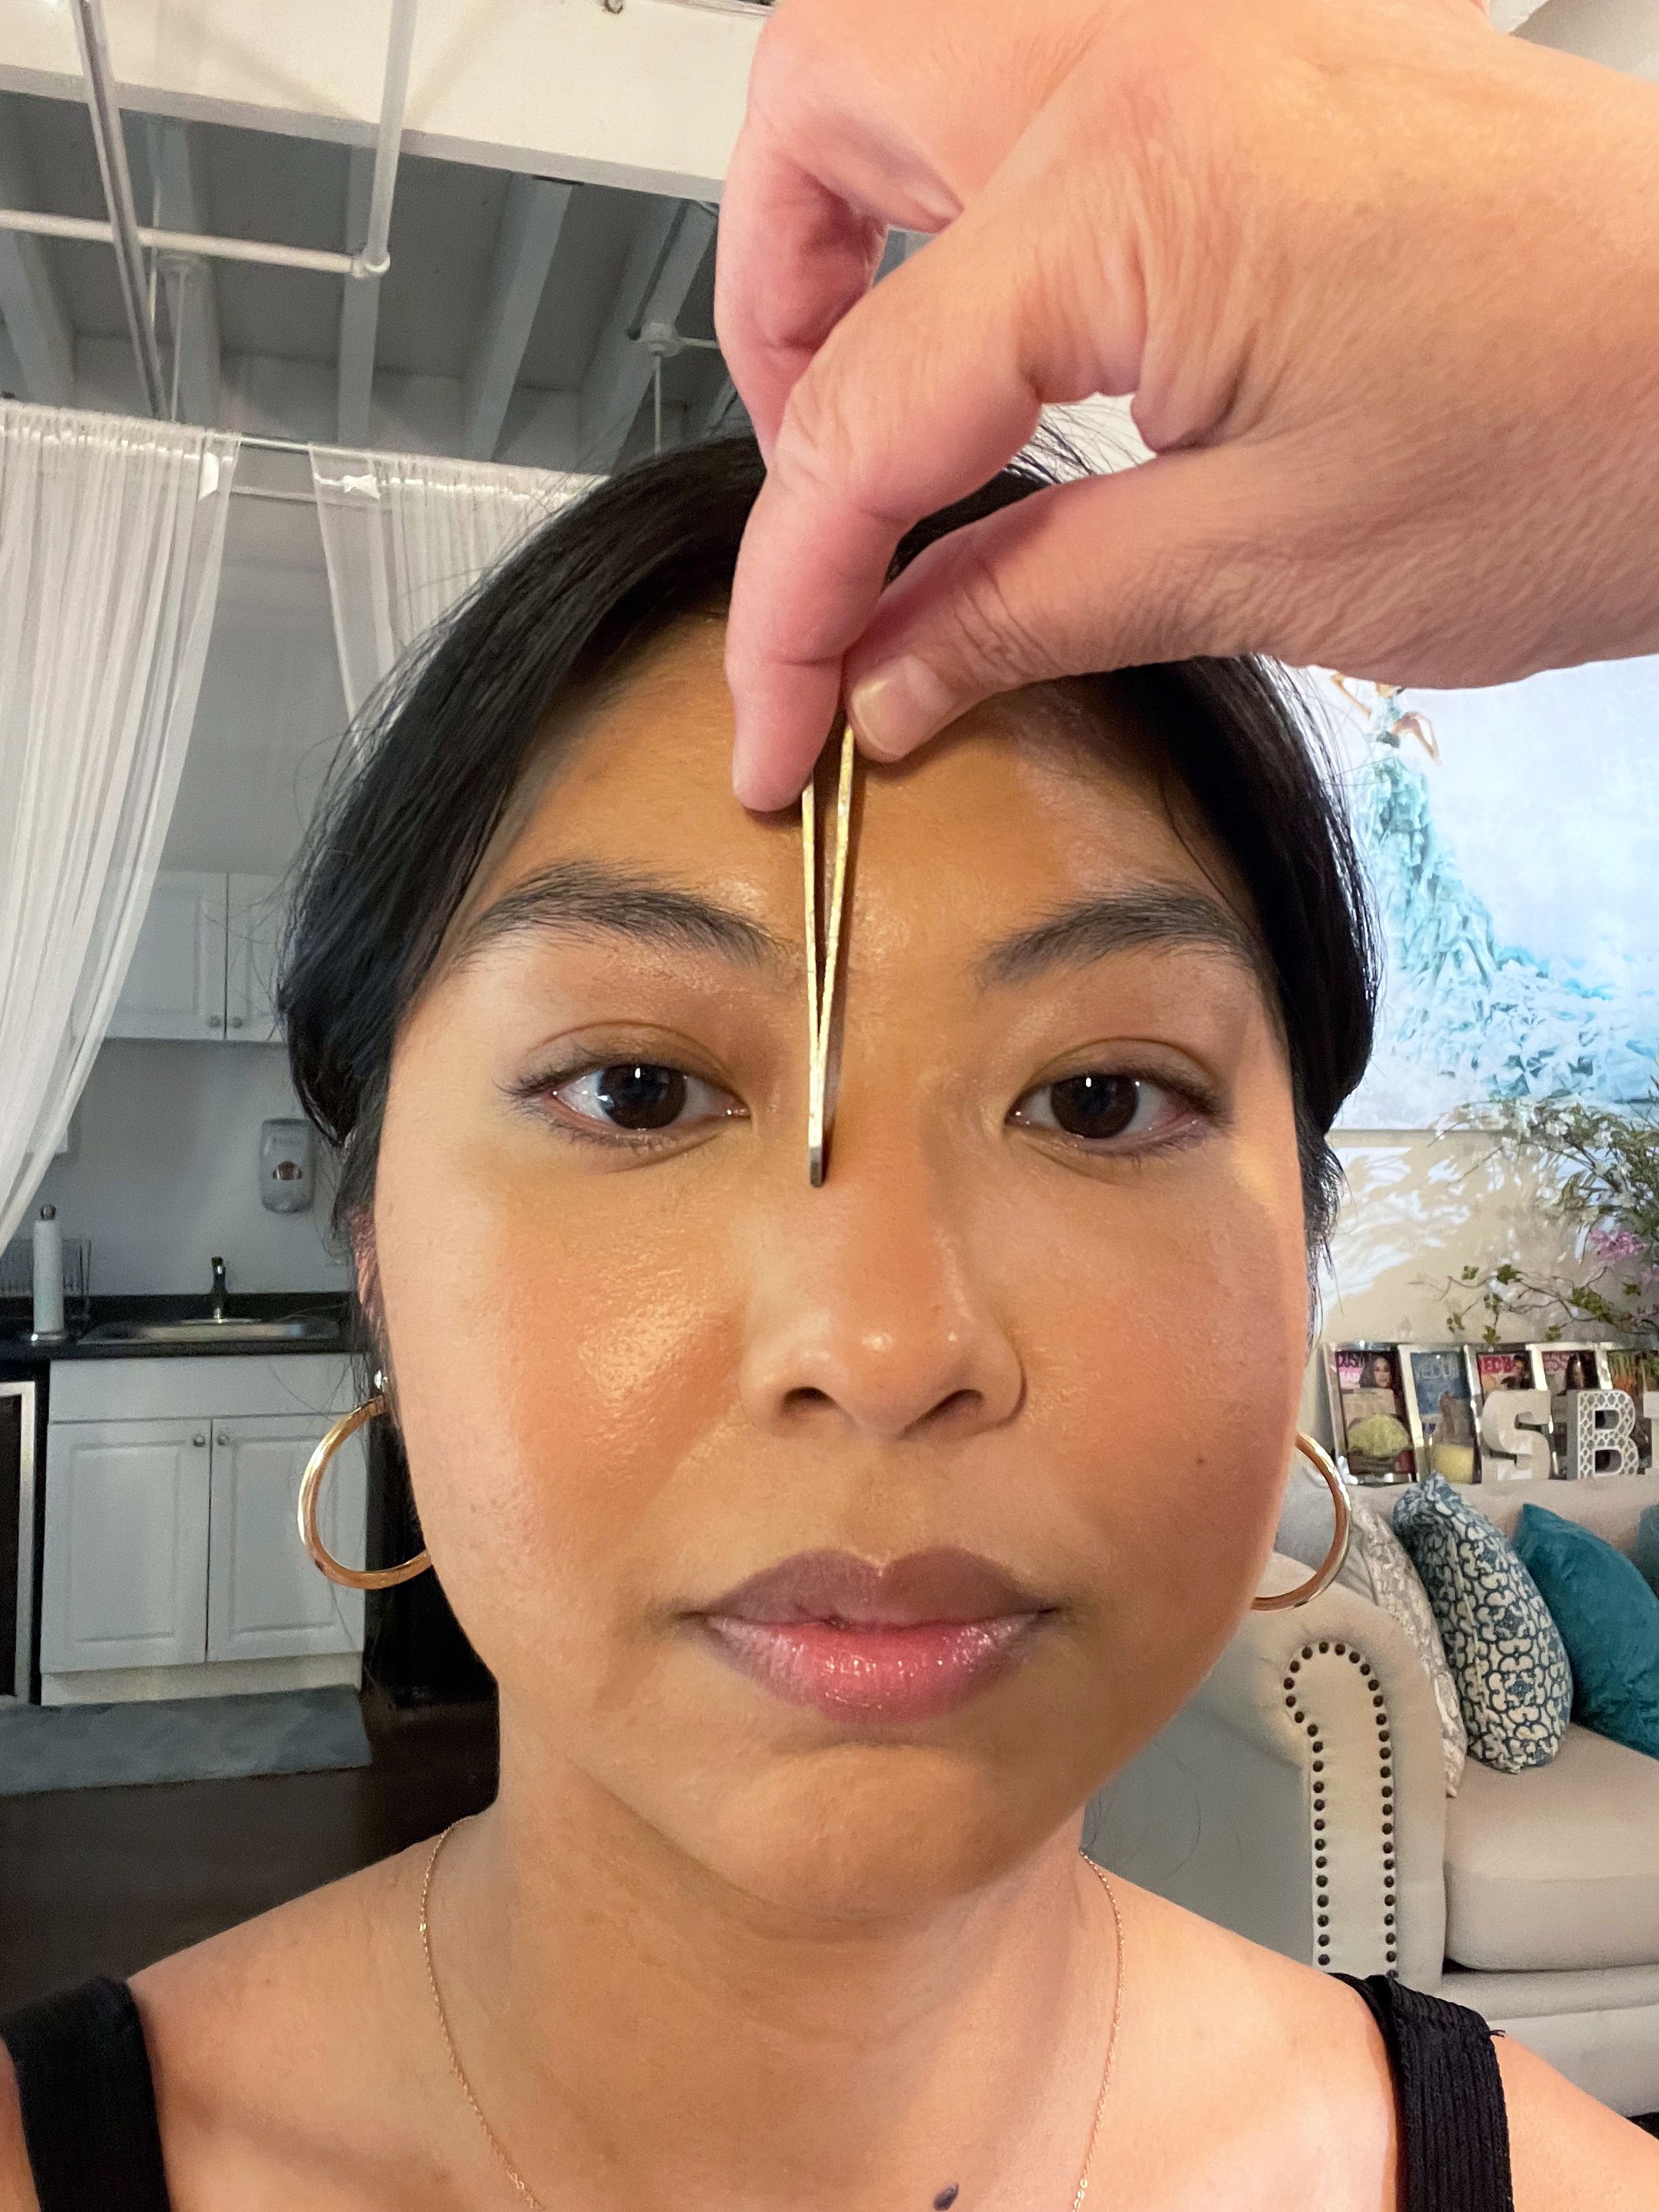 Shape For How Eyebrows Tips 3 to - Eyebrows in Perfect 2021